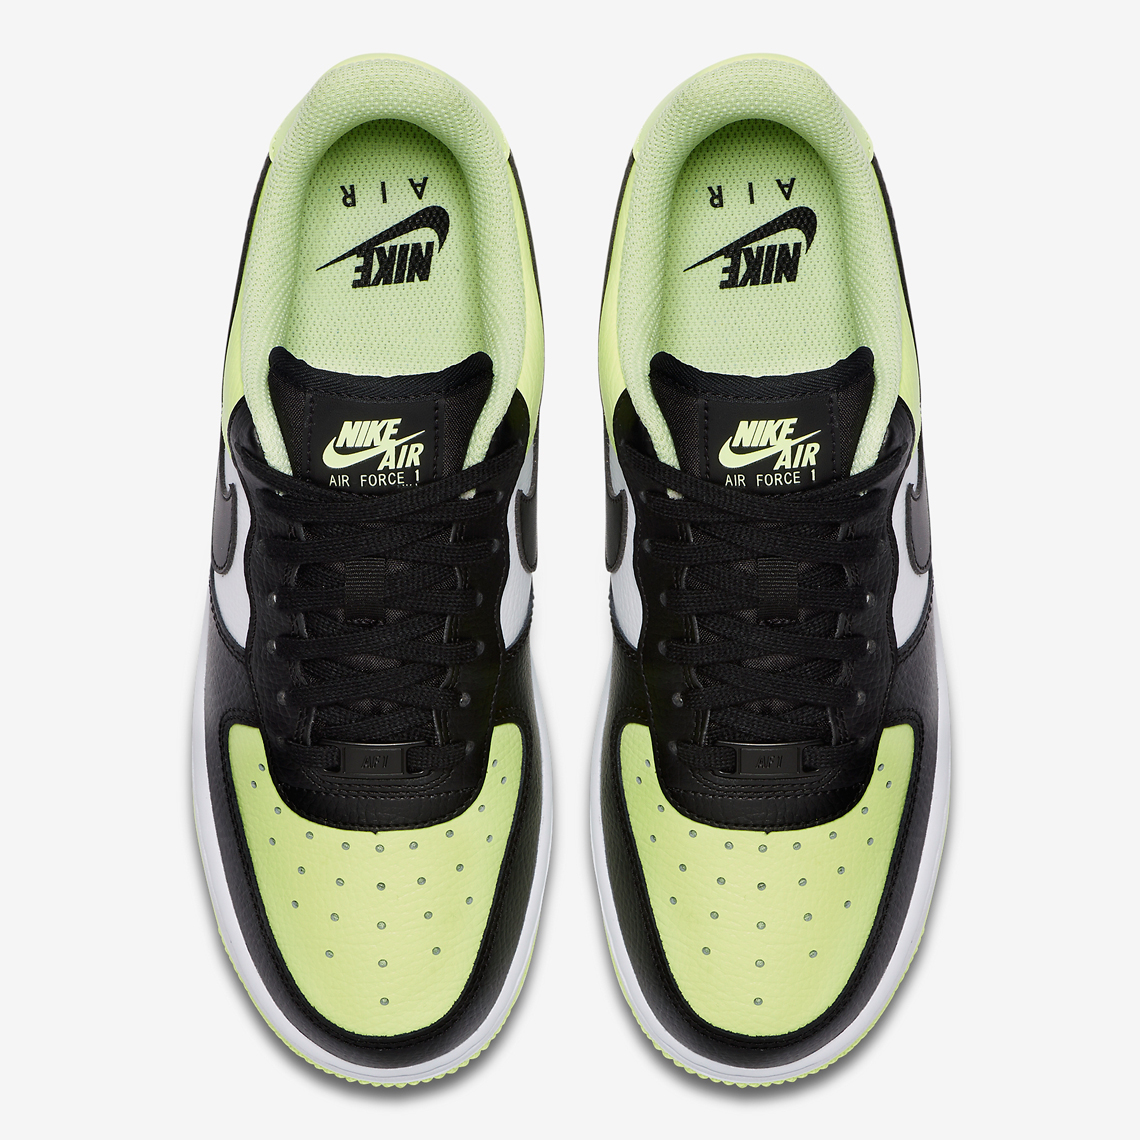 Nike Air Force 1 Low Barely Volt CW2361-700 | SneakerNews.com